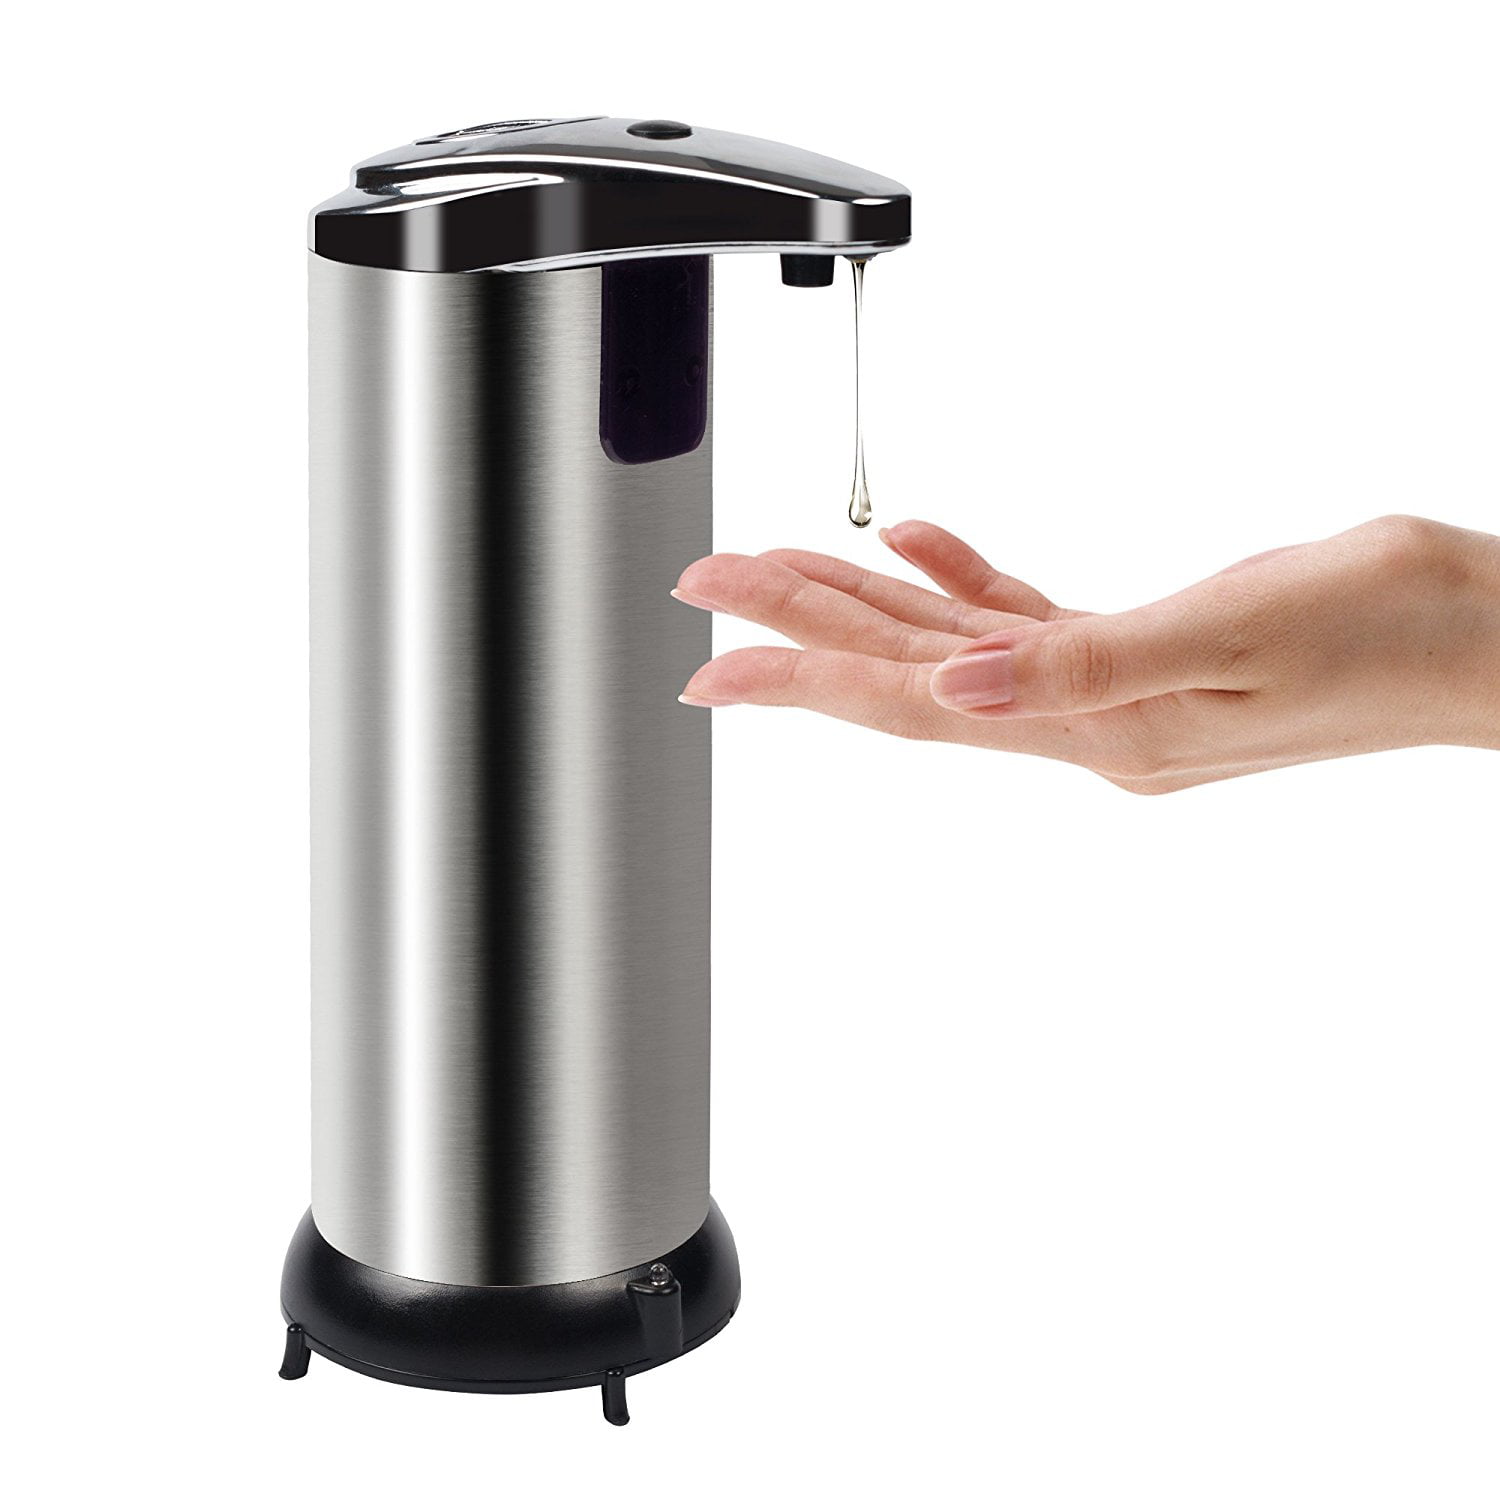 BN-LINK Soap dispenser, Touchless Stainless Steel Automatic Soap